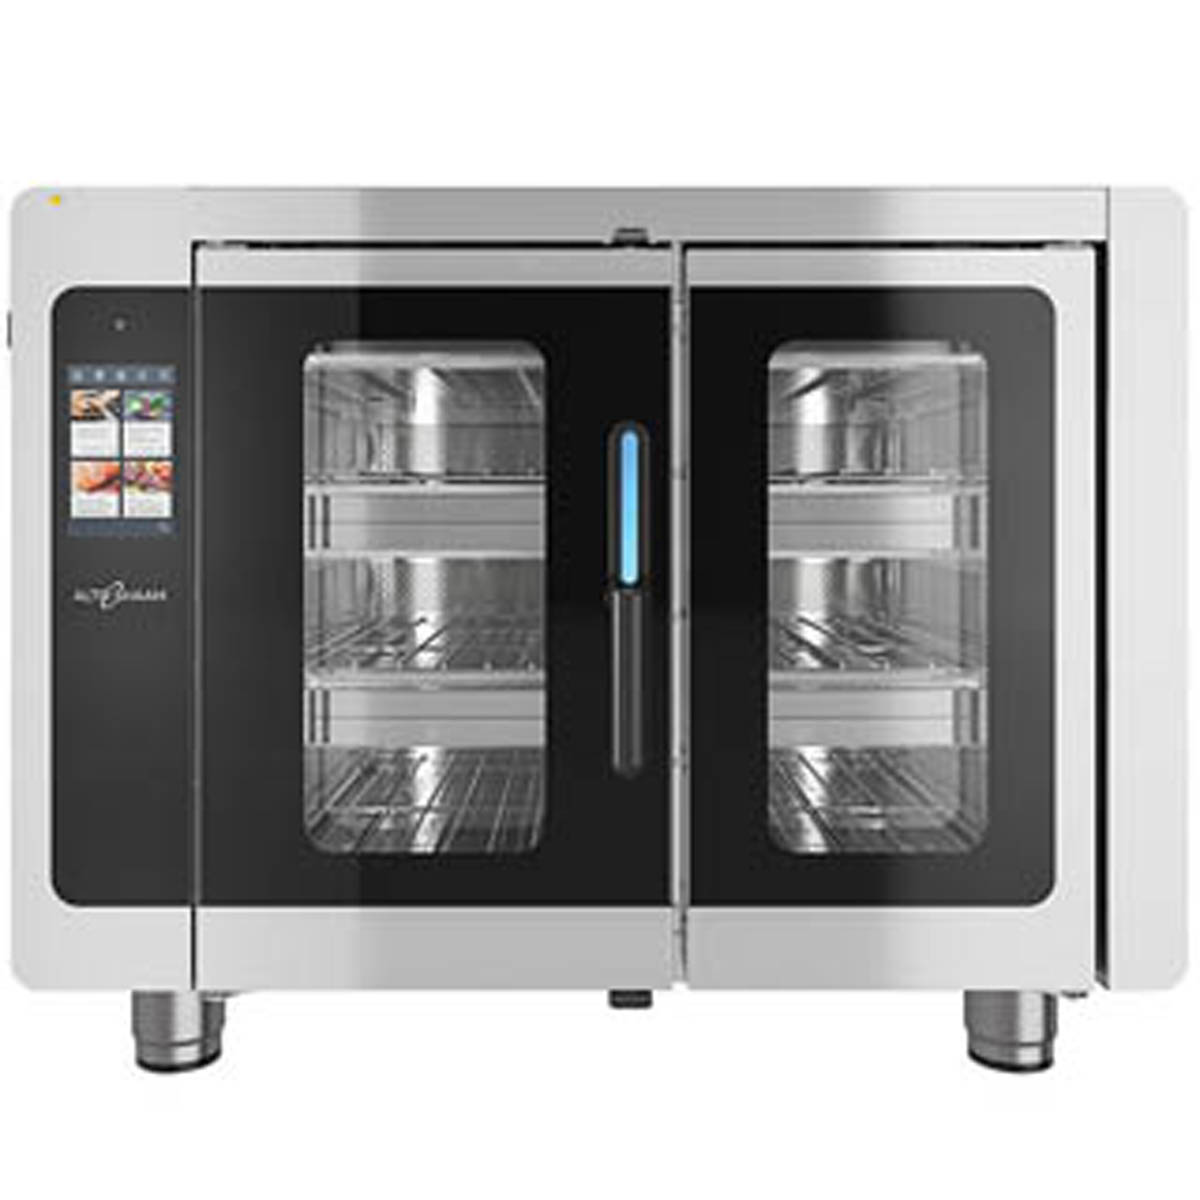 Alto-Shaam Vector F Series VMC-F3E Multi-Cook Oven, (3) Individually Controlled Cooking Chambers